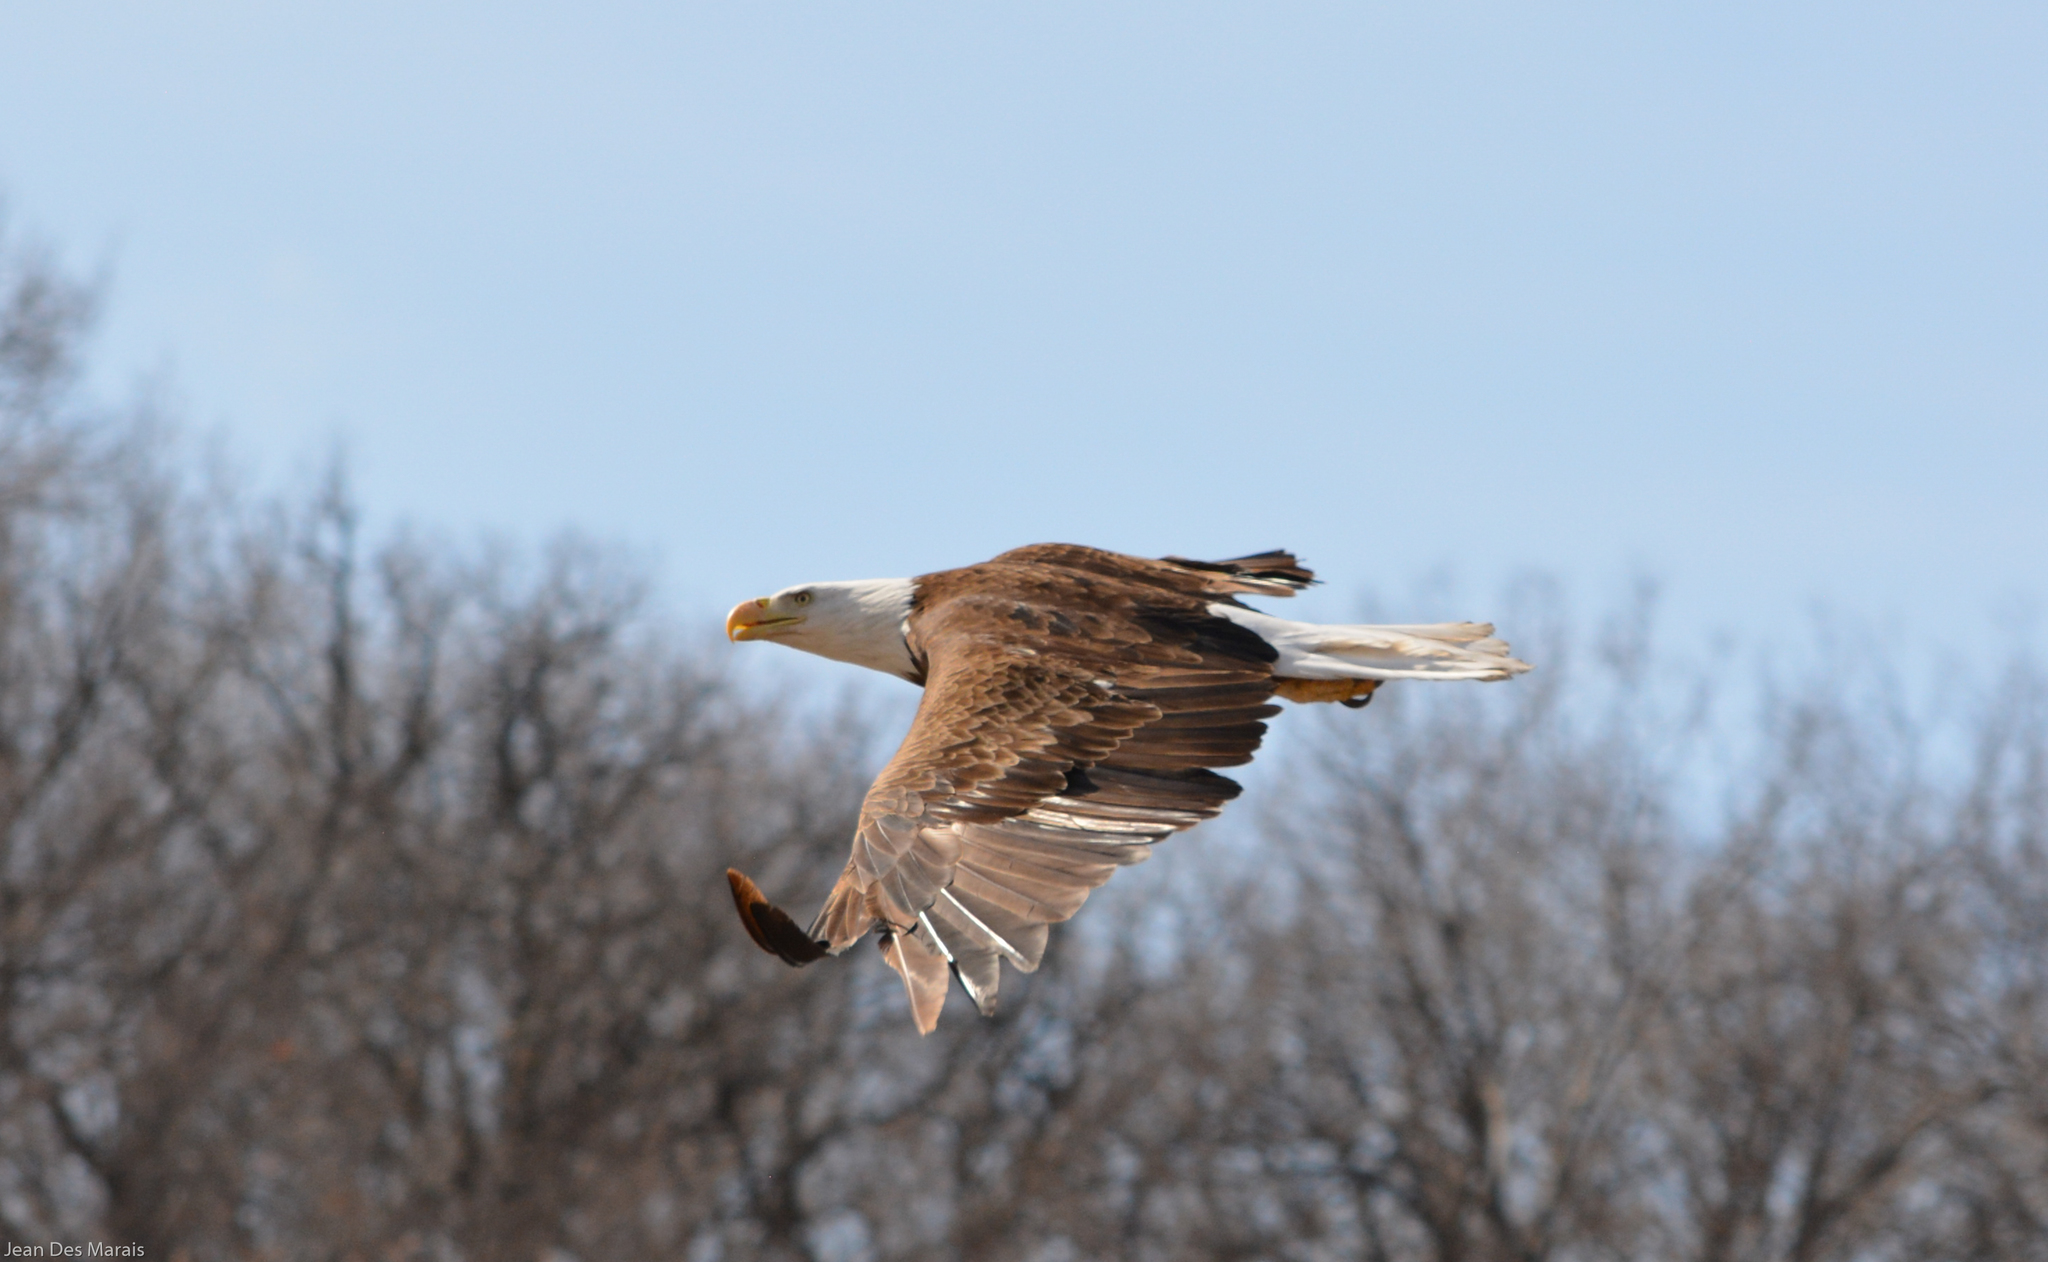 Bald eagle flying against bare trees and a blue sky.